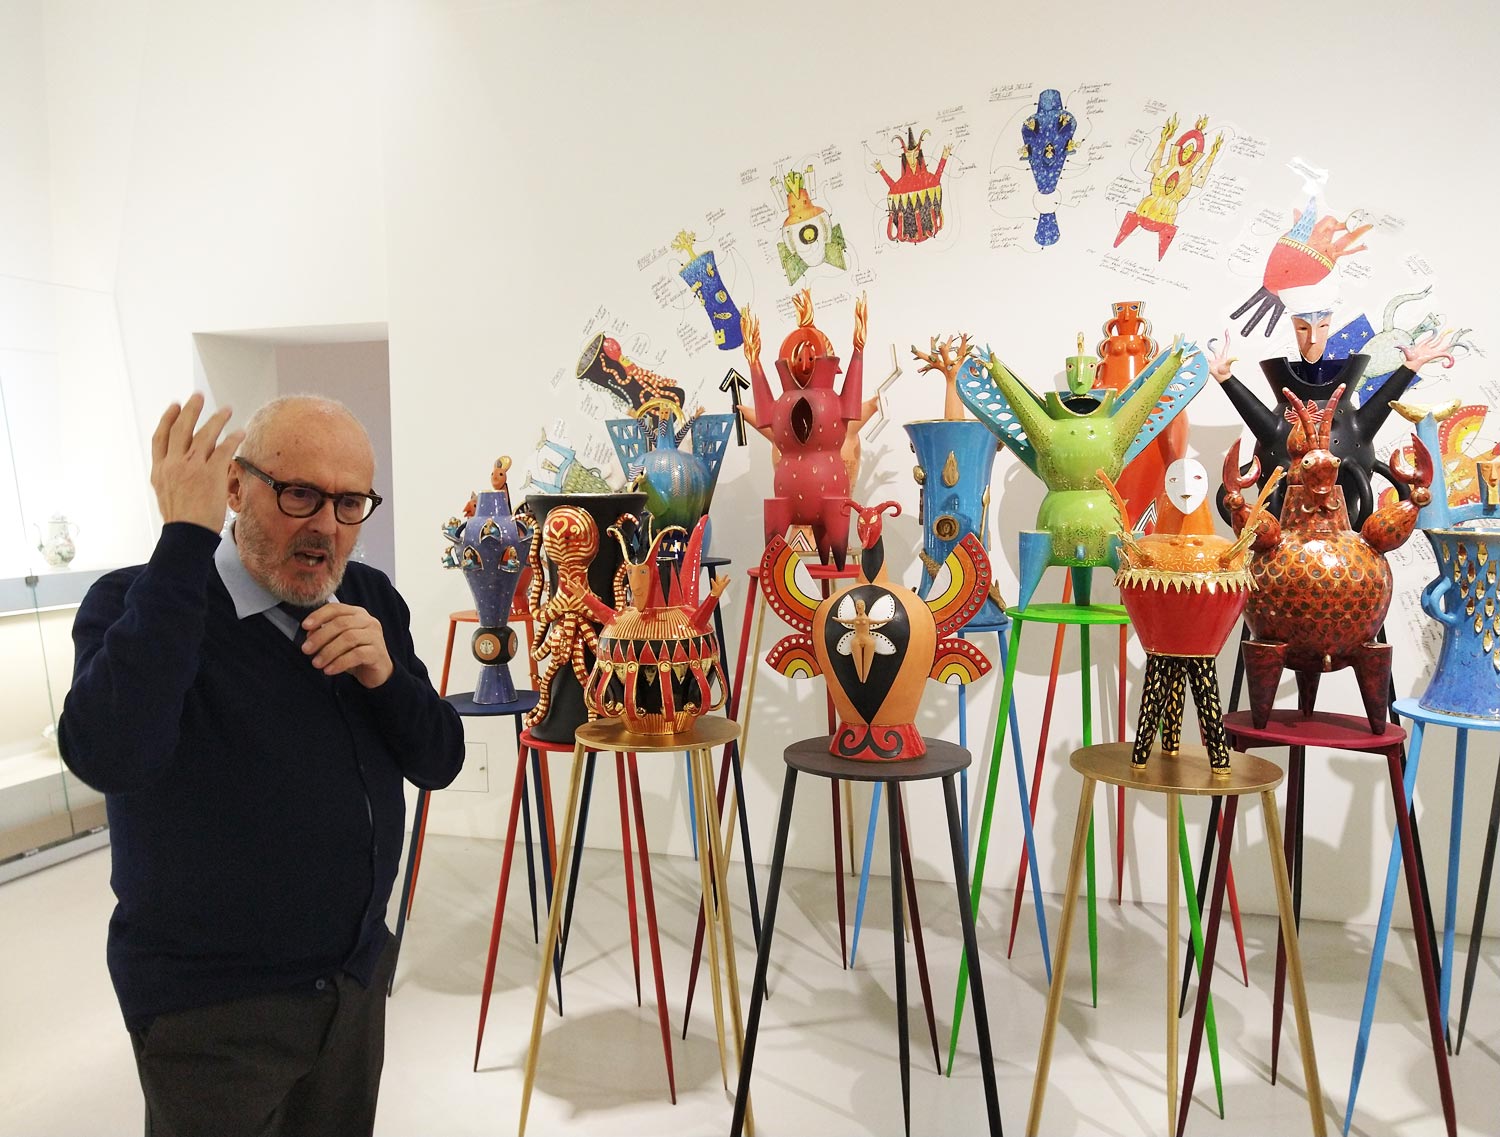 Sandro Lorenzini in front of one of his installations at the Museum of Ceramics in Savona, Italy.